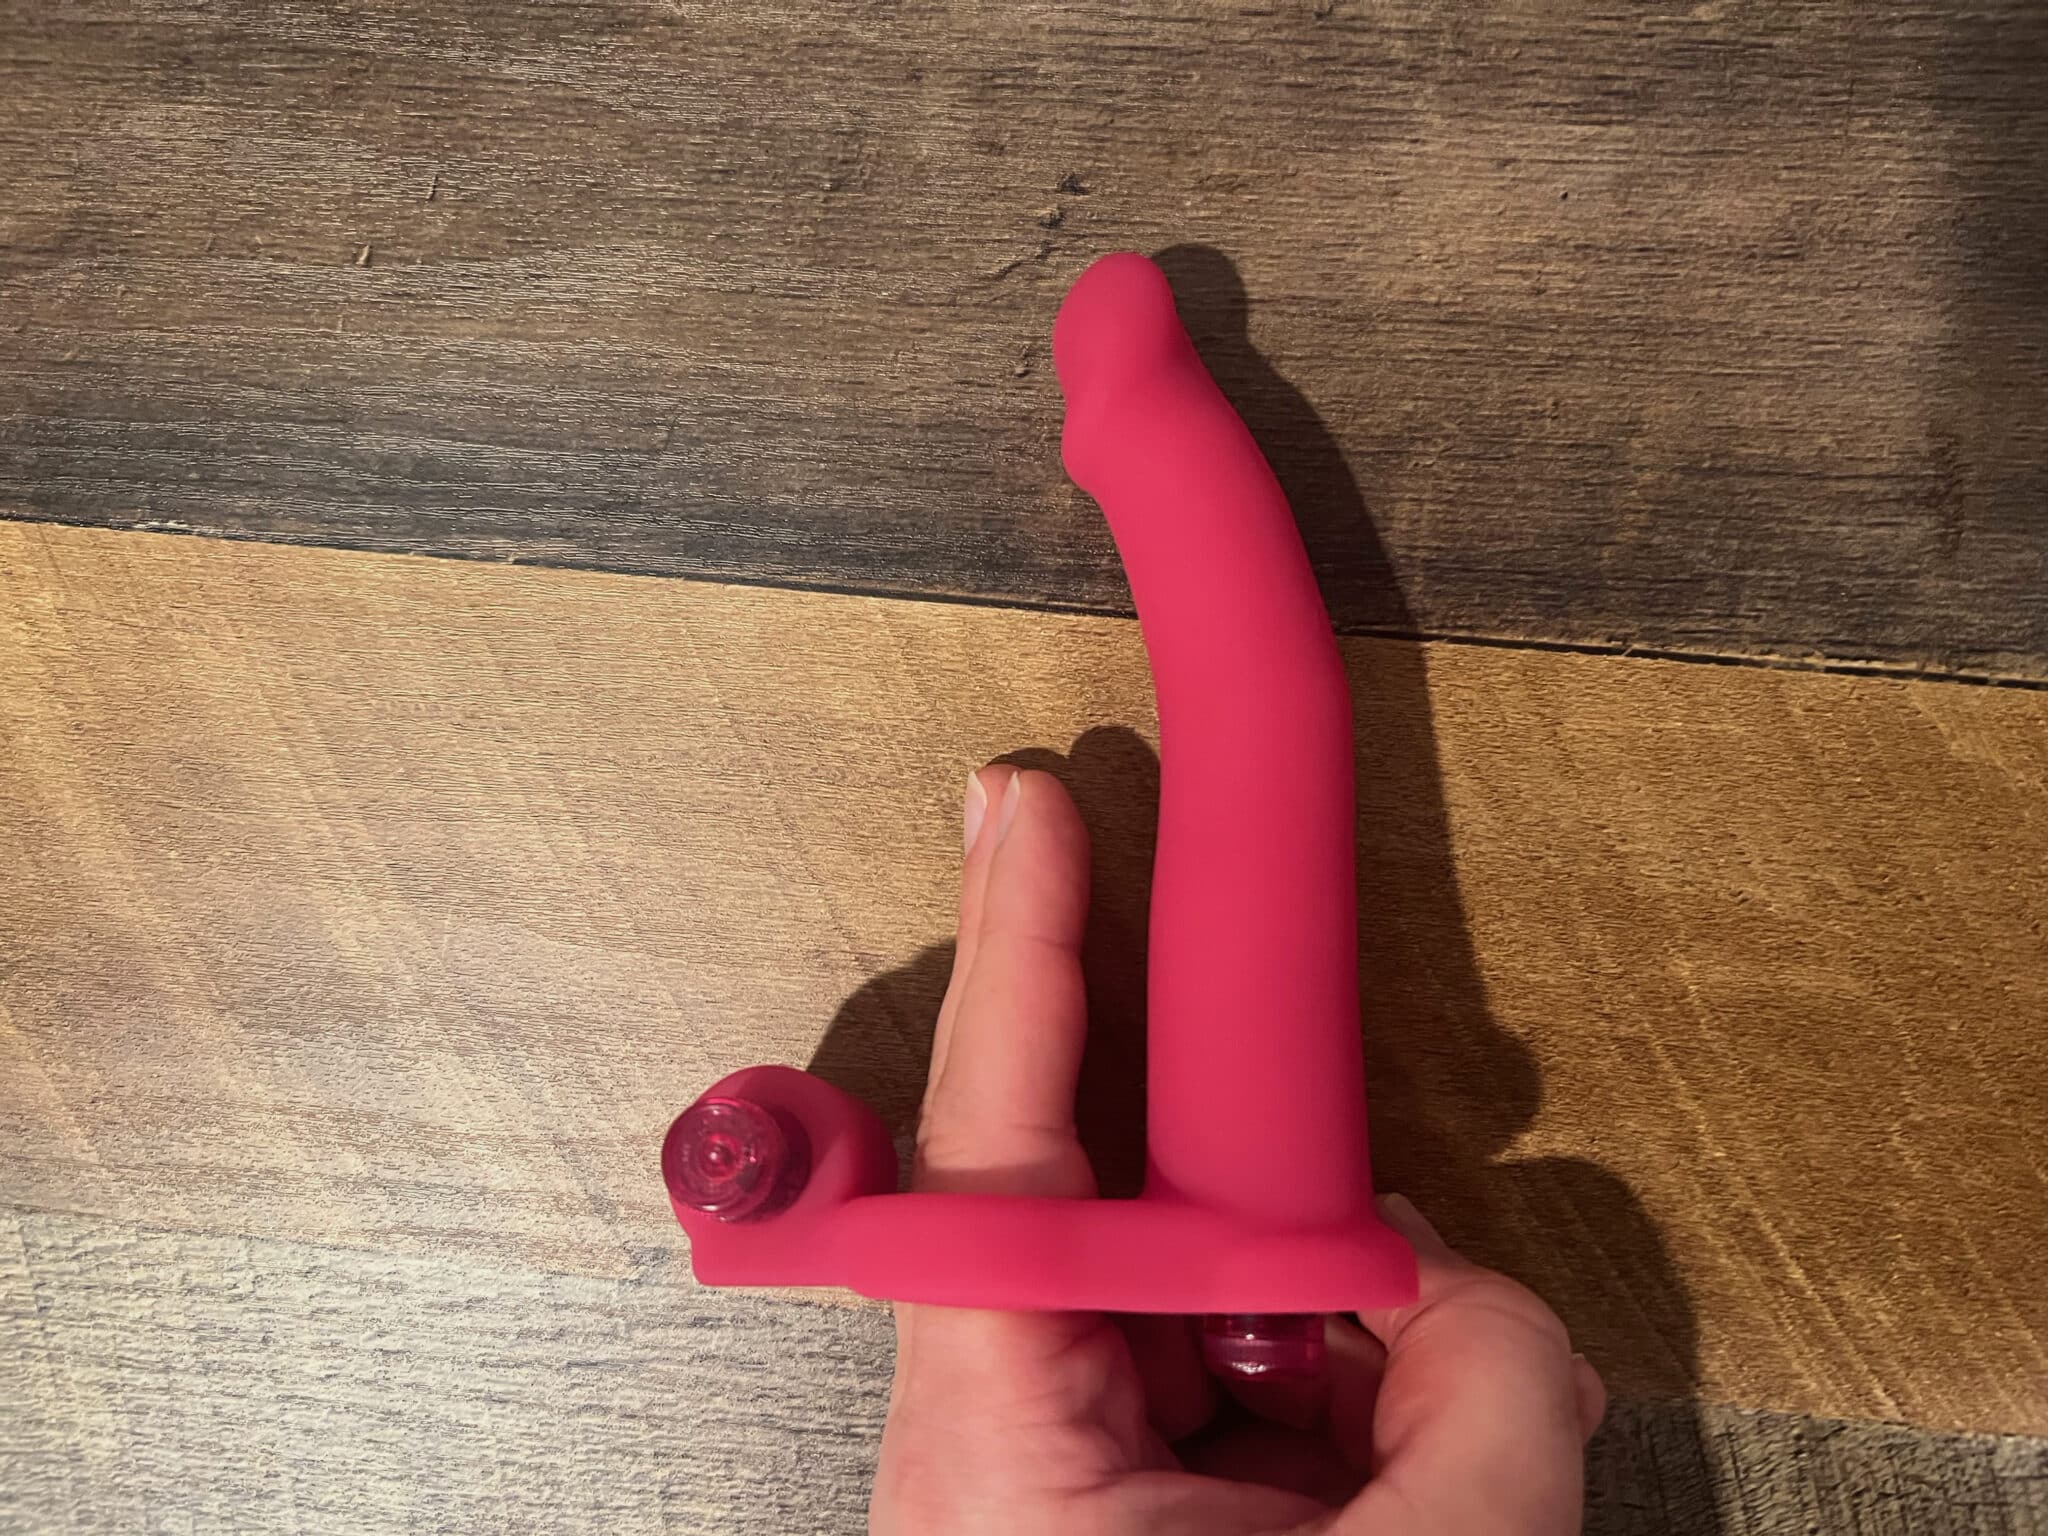 Nasstoys Double Penetrator Studmaker Cock Ring How easy was it to use?